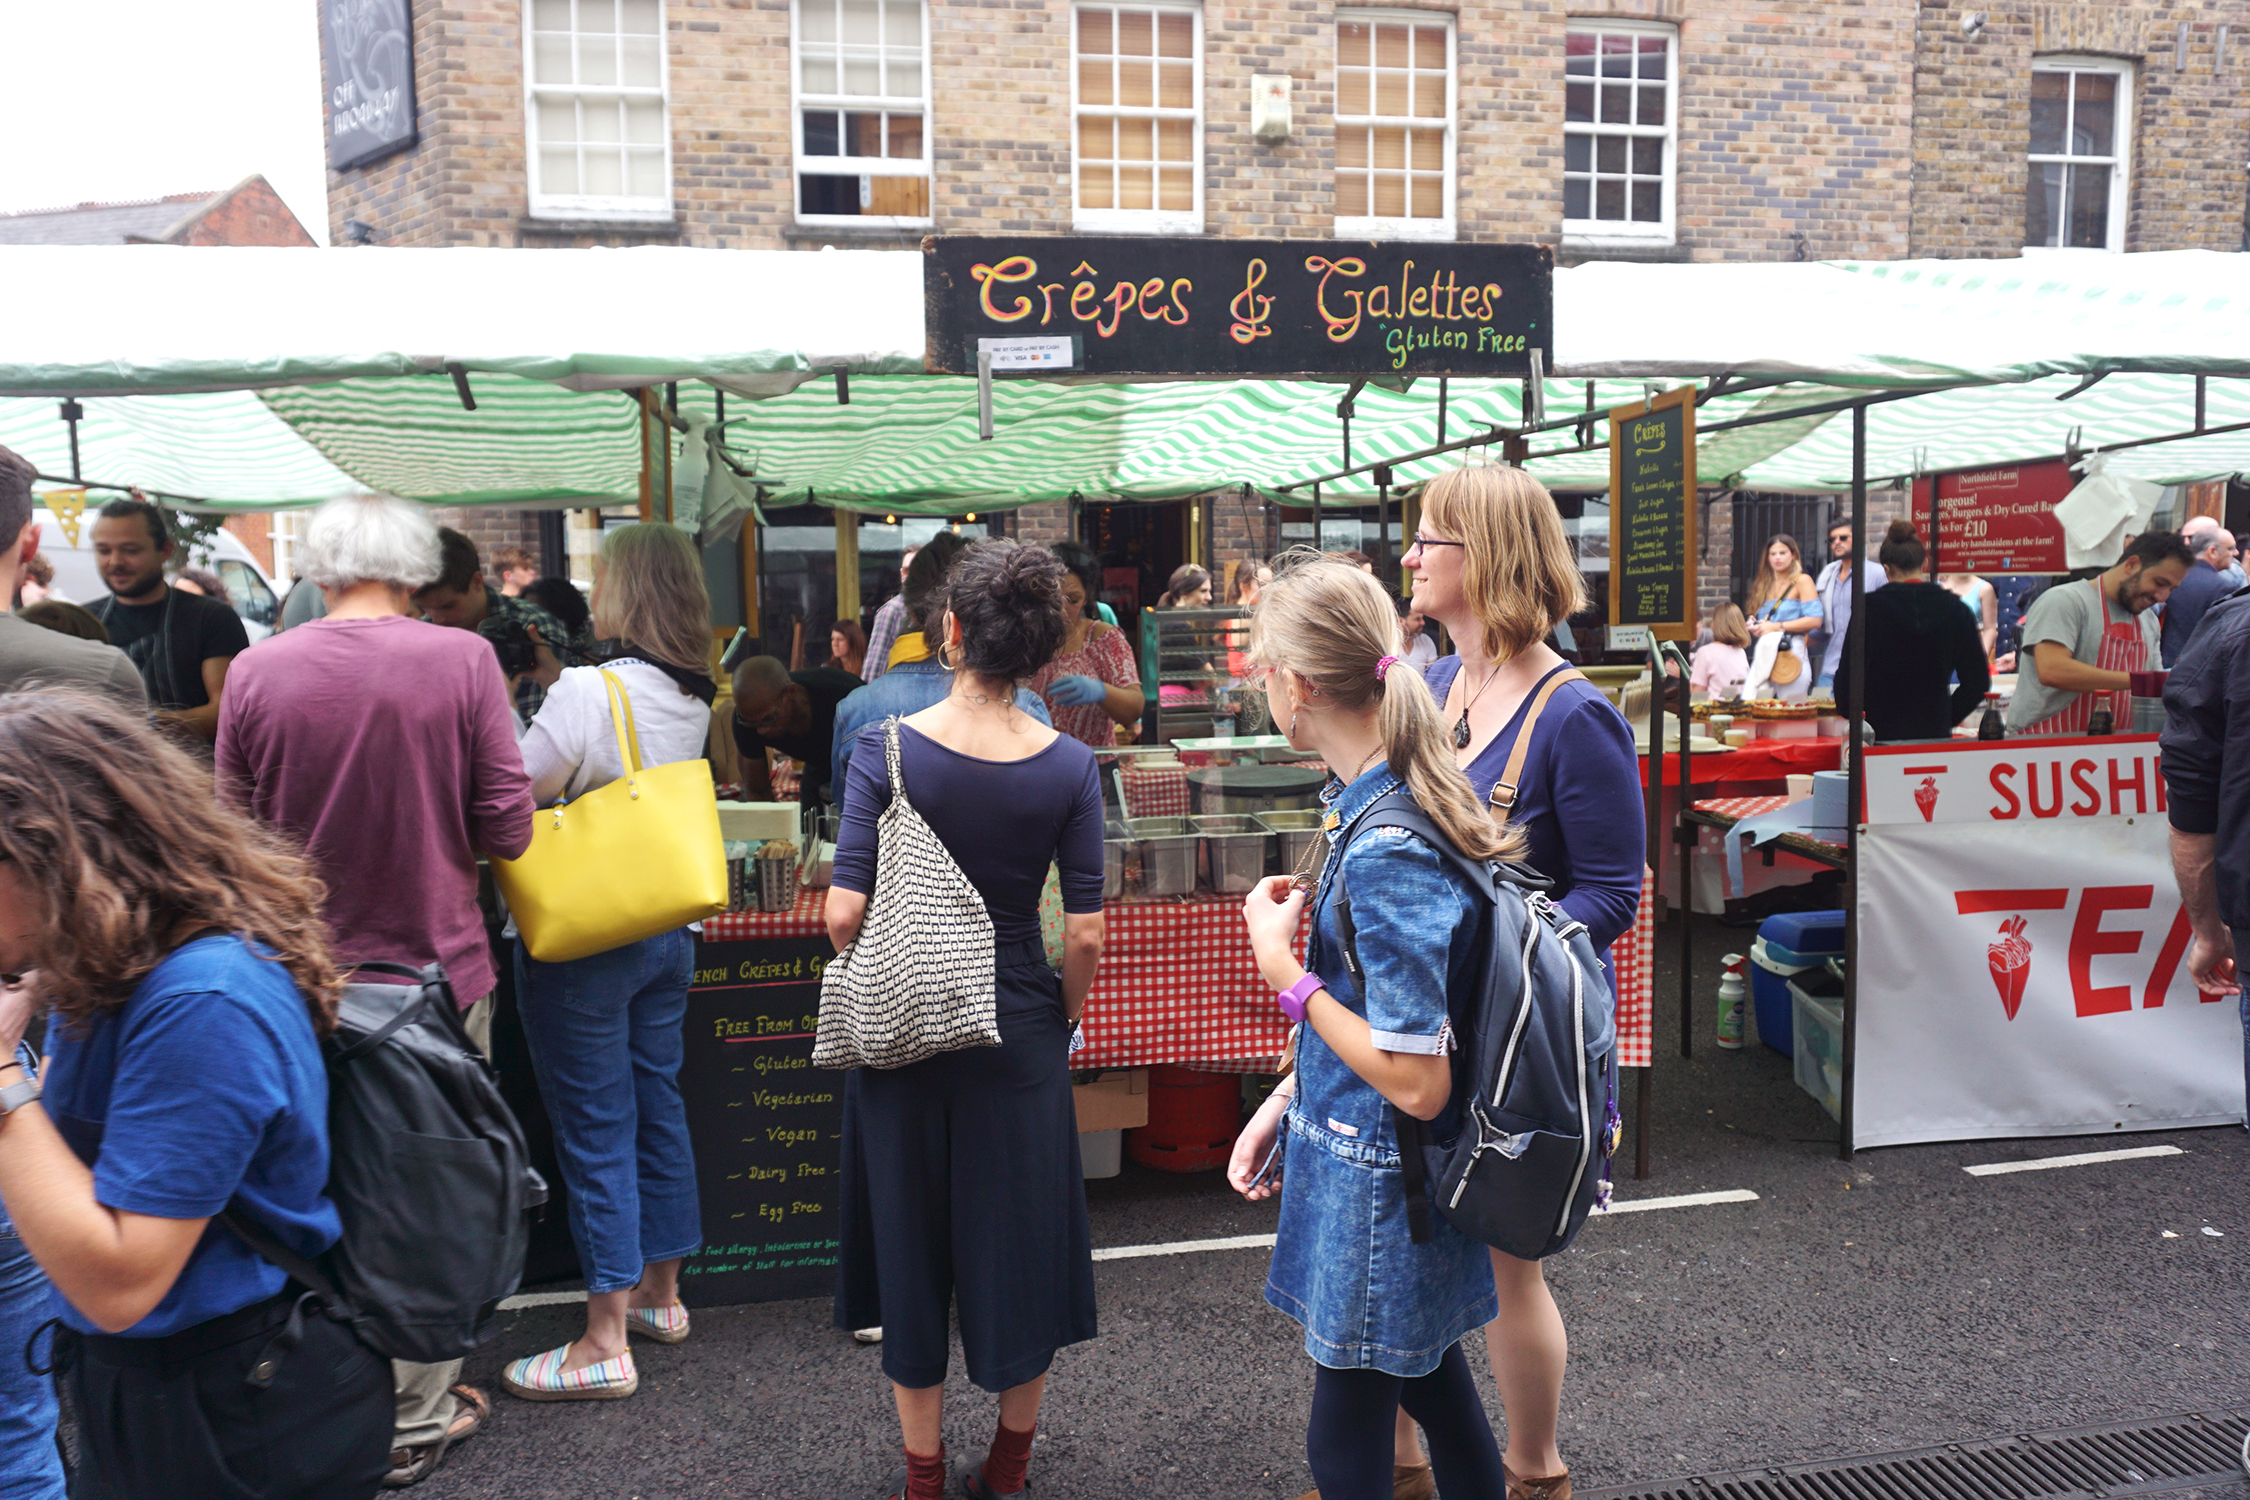 French Crepes & Galettes in Broadway Market | gluten free Broadway Market guide | Hackney, London